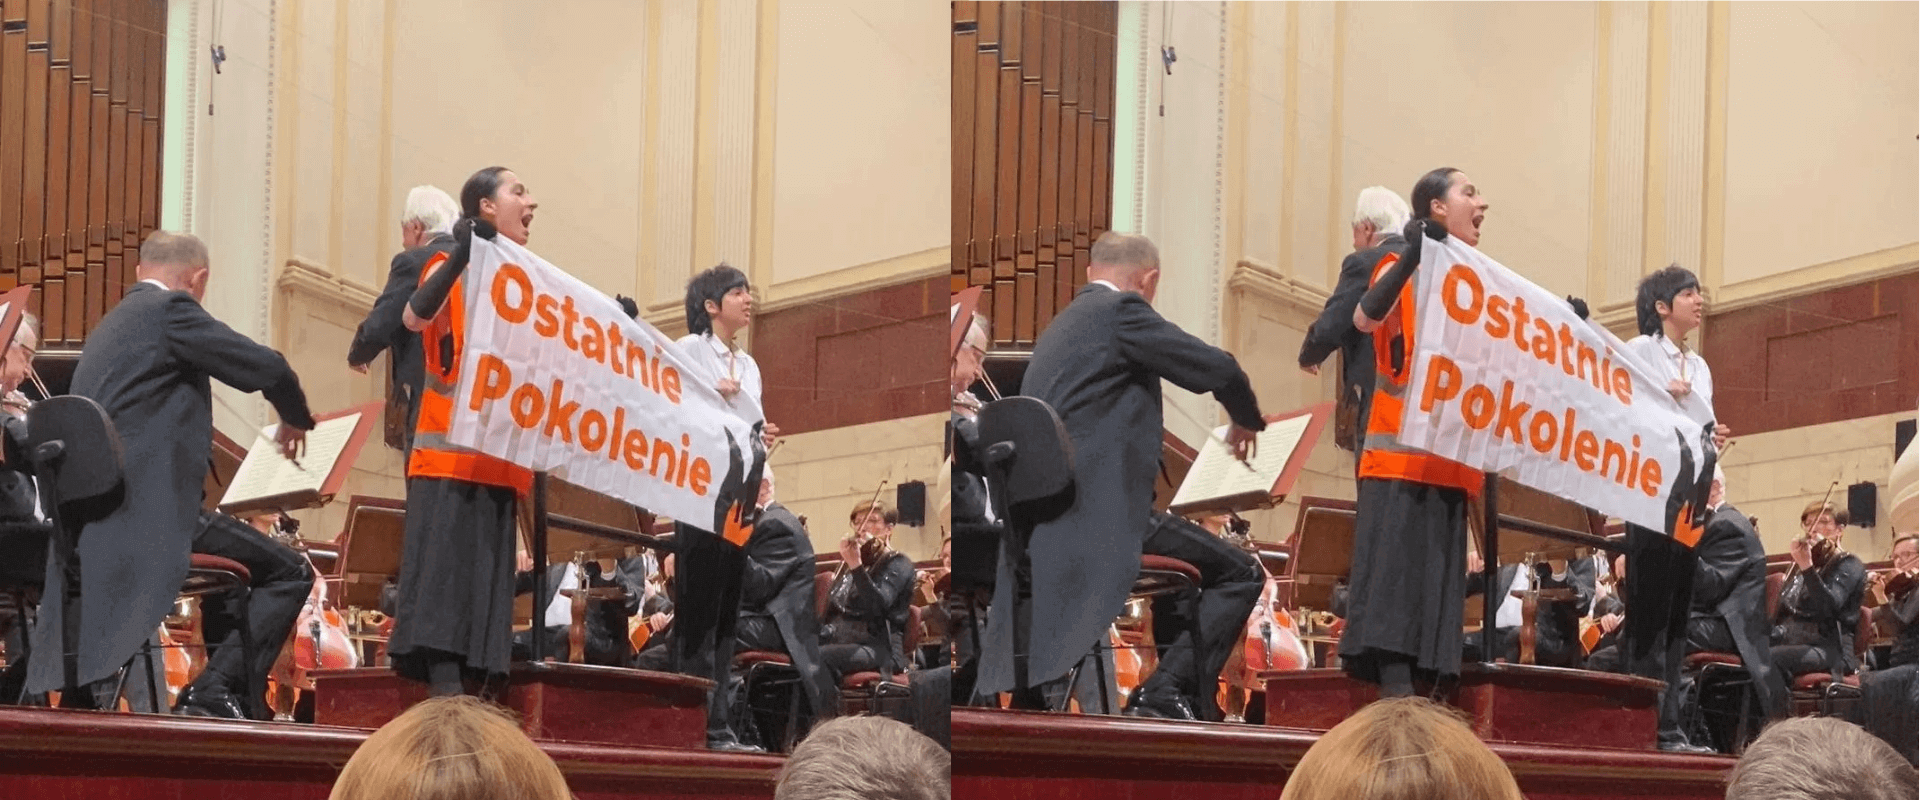 ”This is an emergency!” – Warsaw Philharmonic concert interrupted by climate protesters